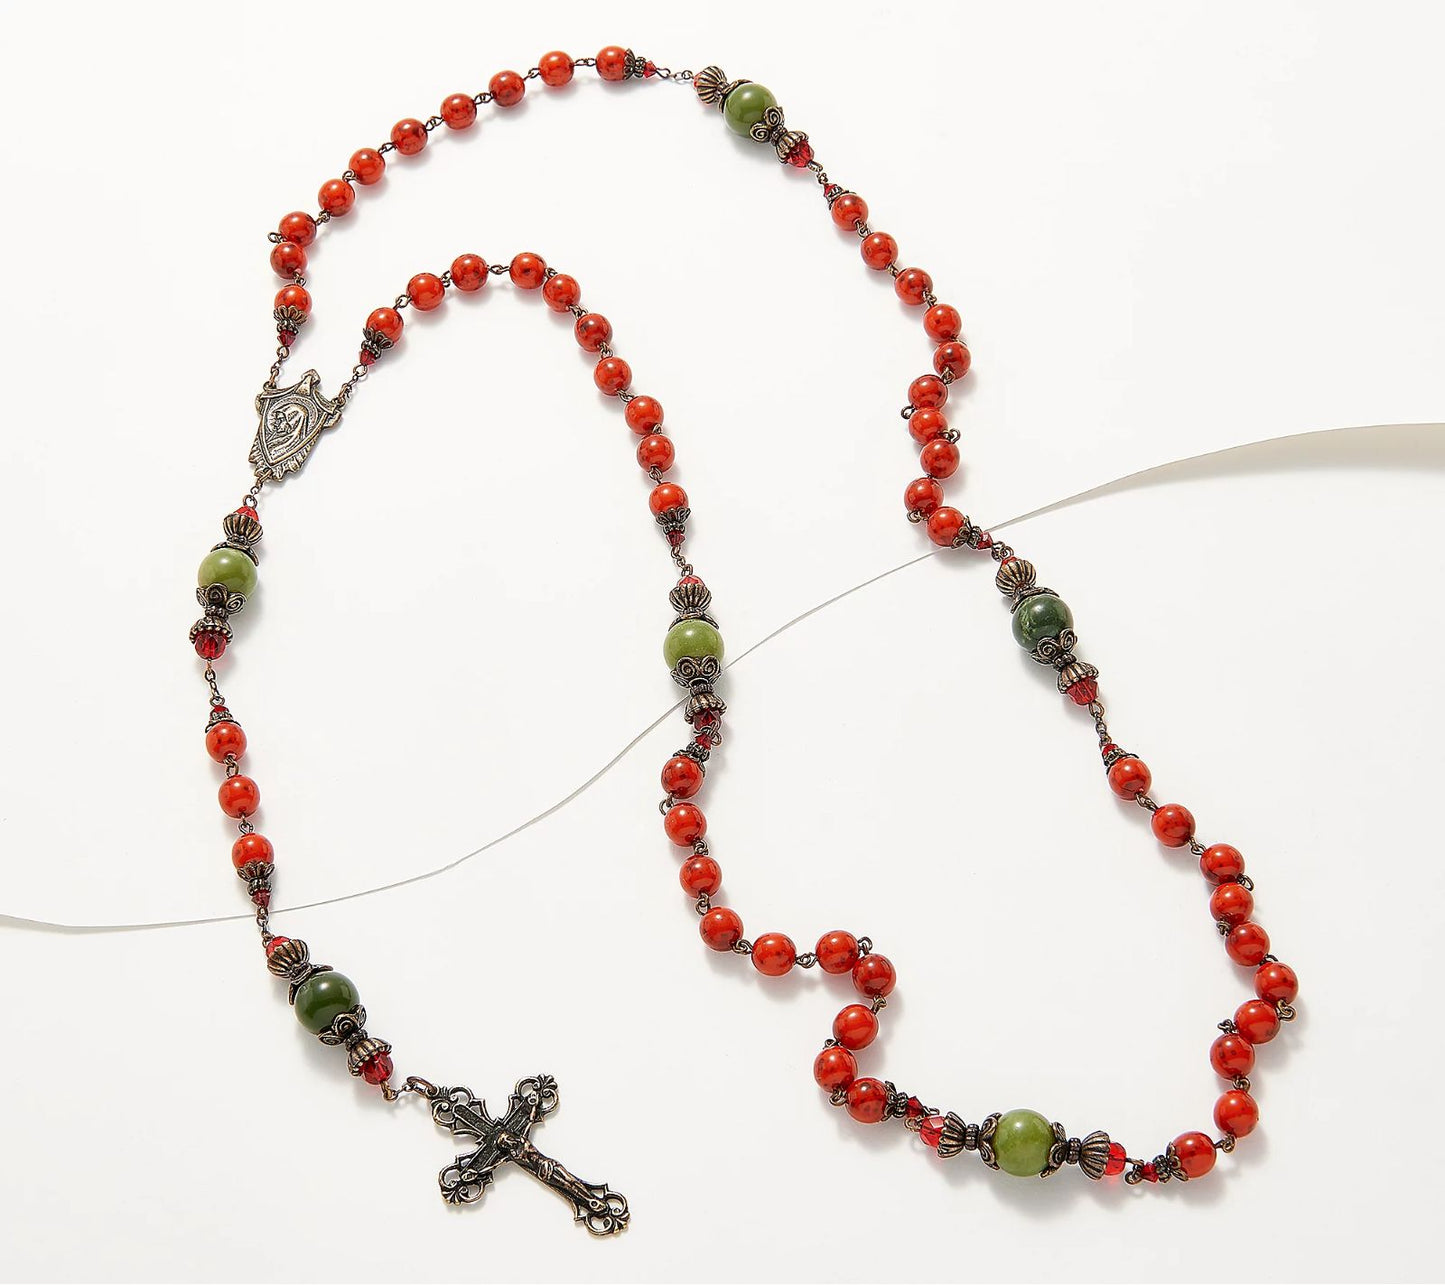 Connemara Marble Copper Rosary Cross Red Glass Green Marble Beads Necklace 26.5"